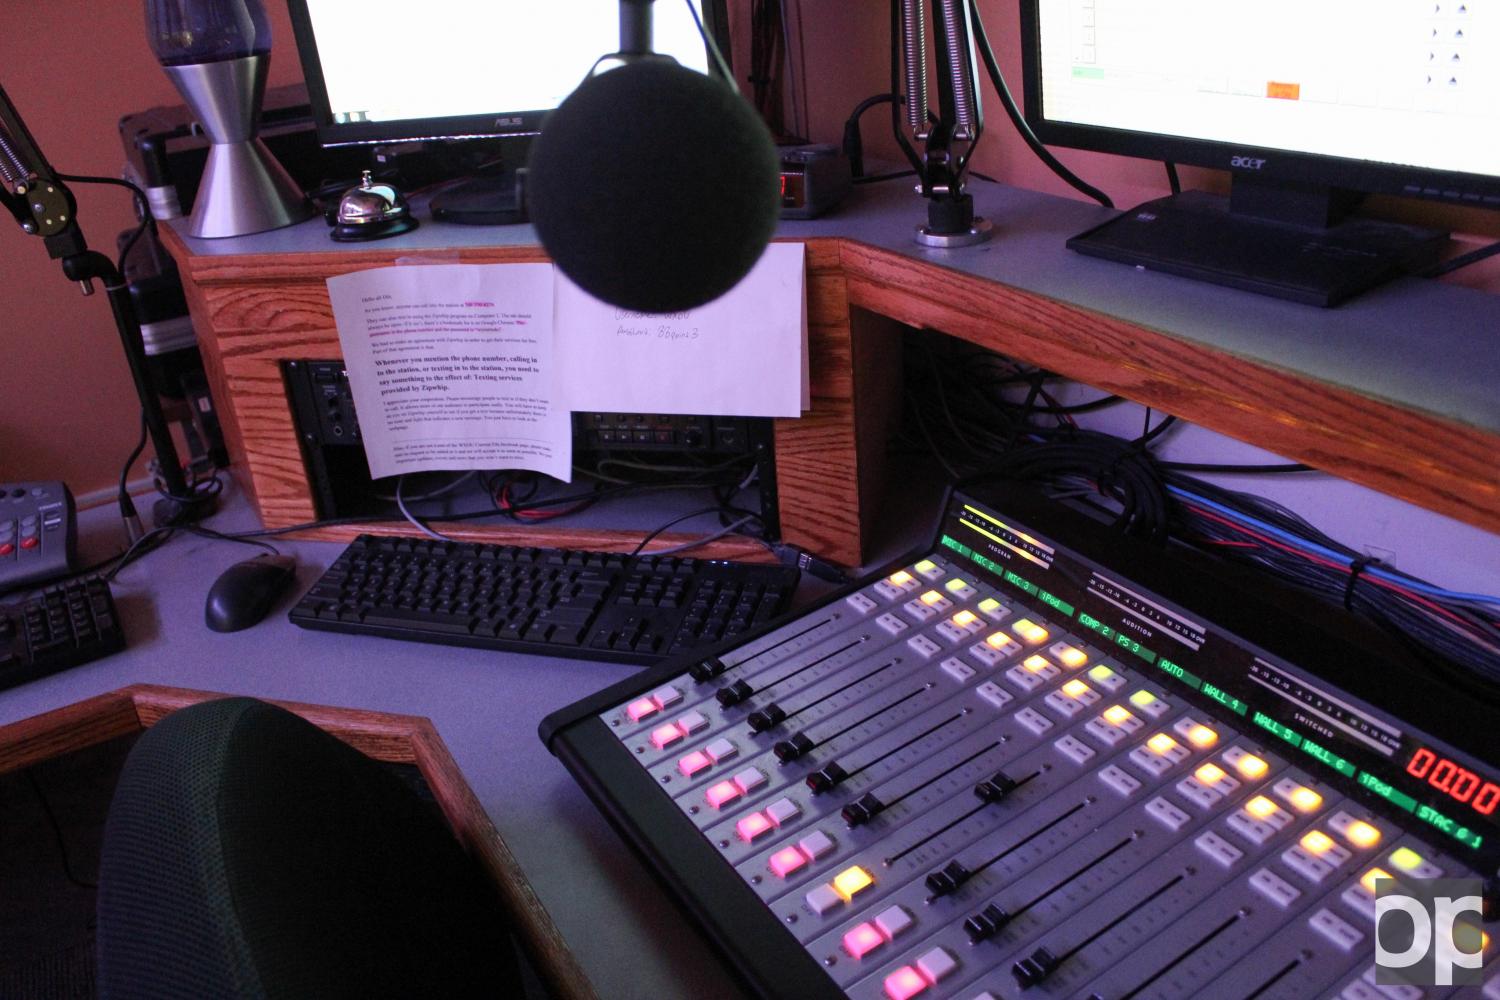 WXOU provides a variety of content- from talk shows to indie music to news.